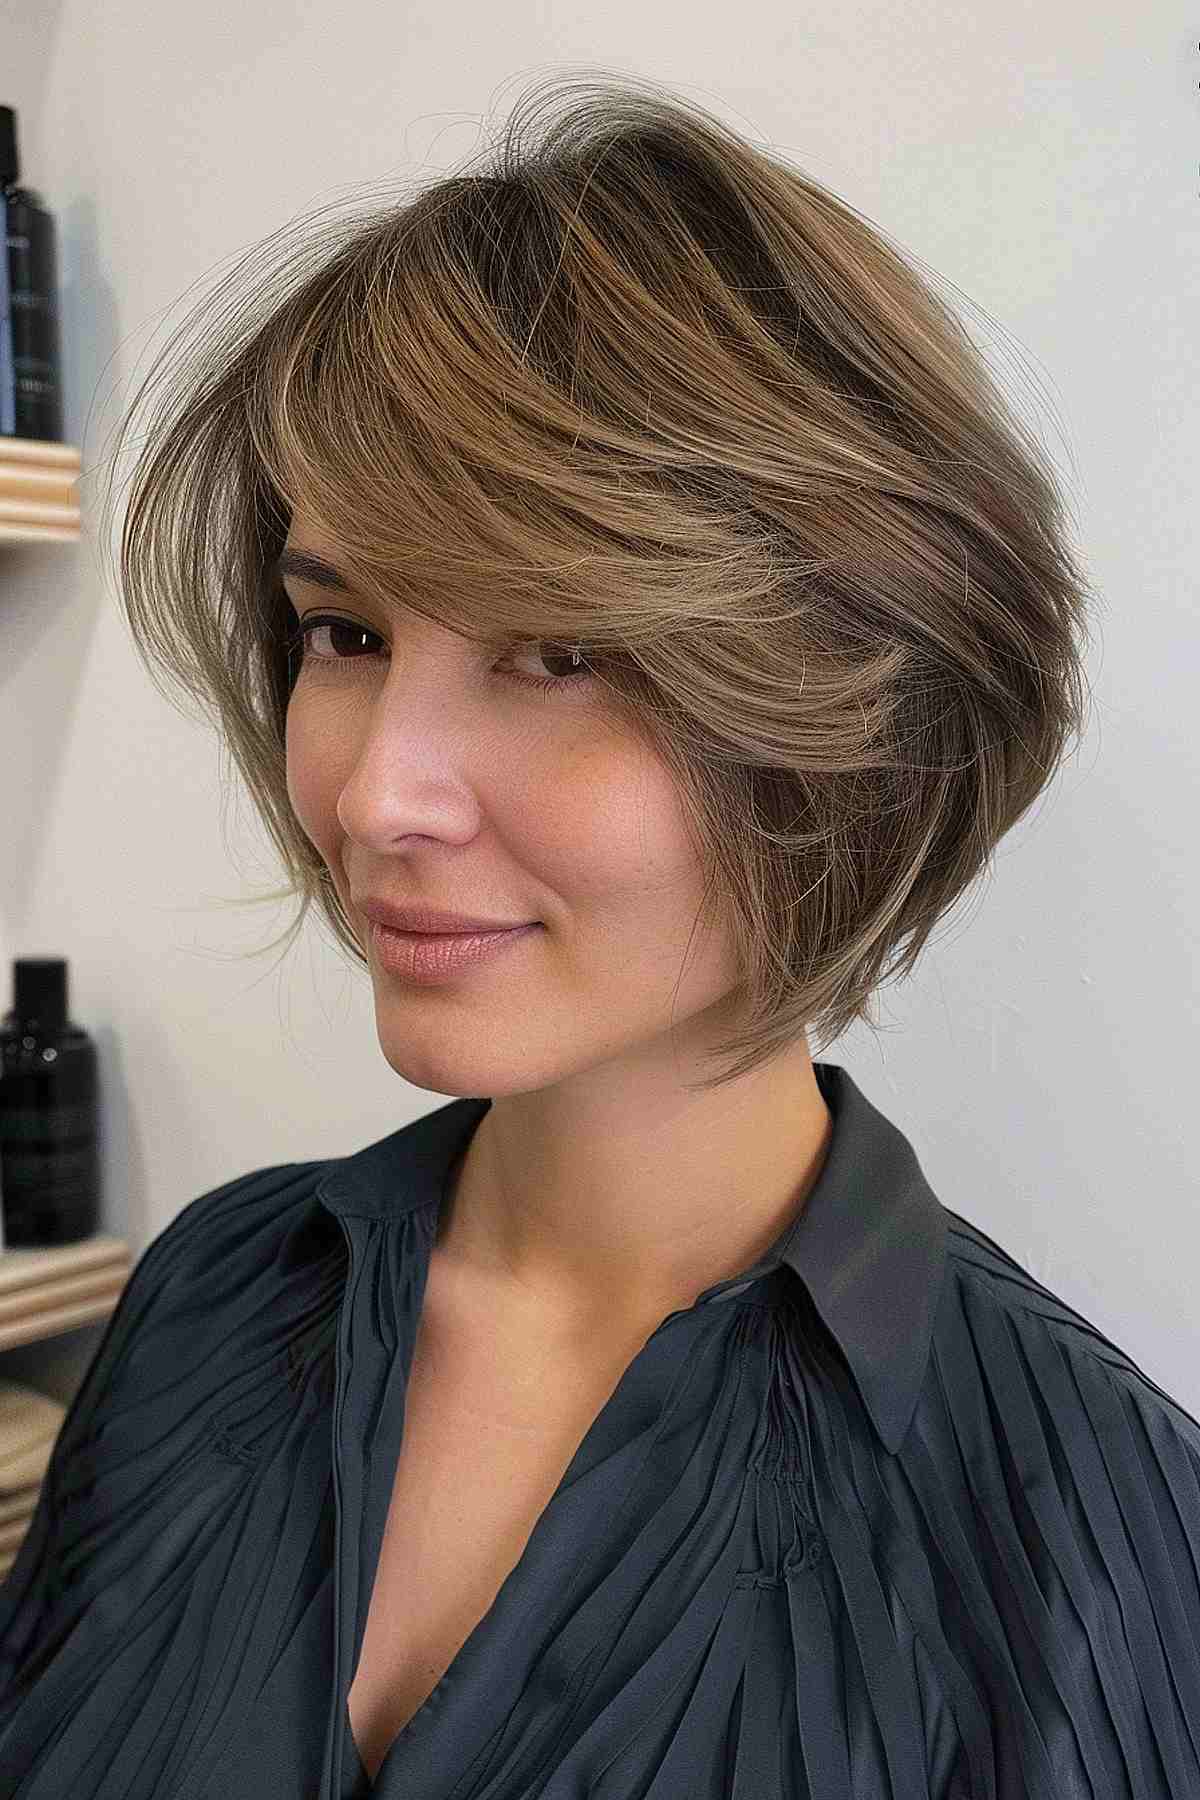 Short bob haircut with feathered layers and side-swept fringe, featuring subtle highlights